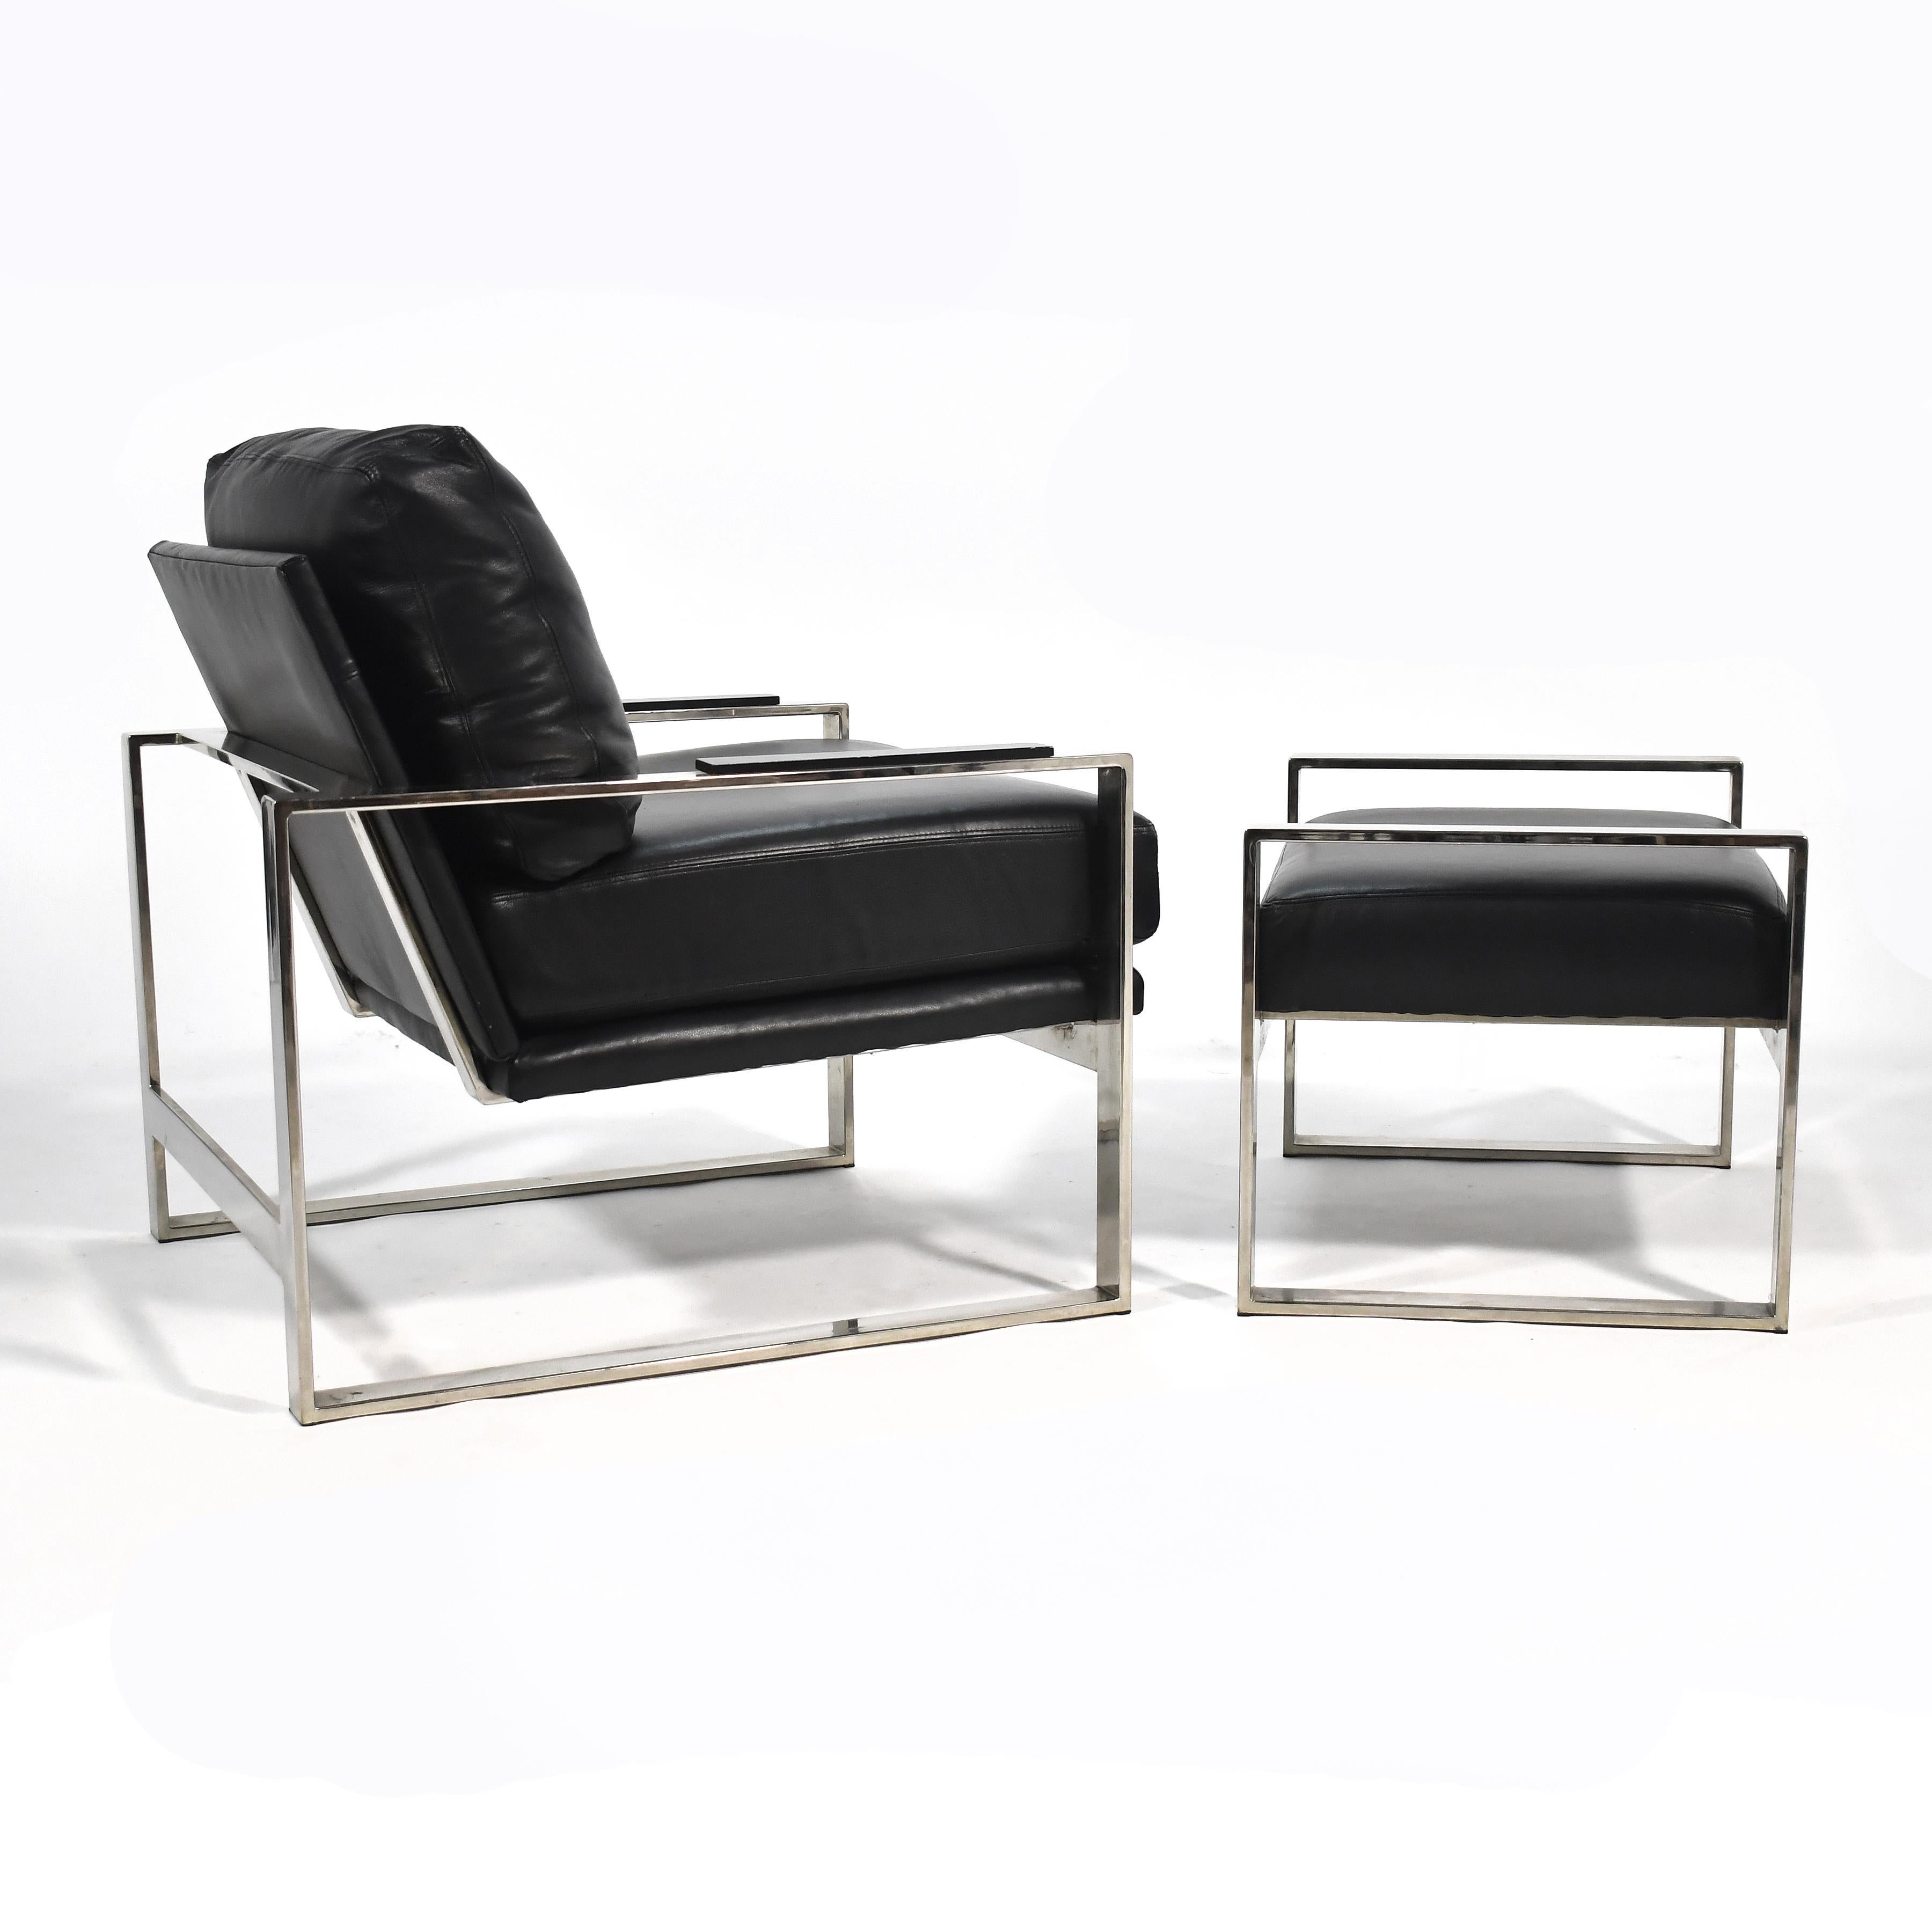 Late 20th Century Chrome Frame Lounge Chair & Ottoman in the Manner of Milo Baughman For Sale